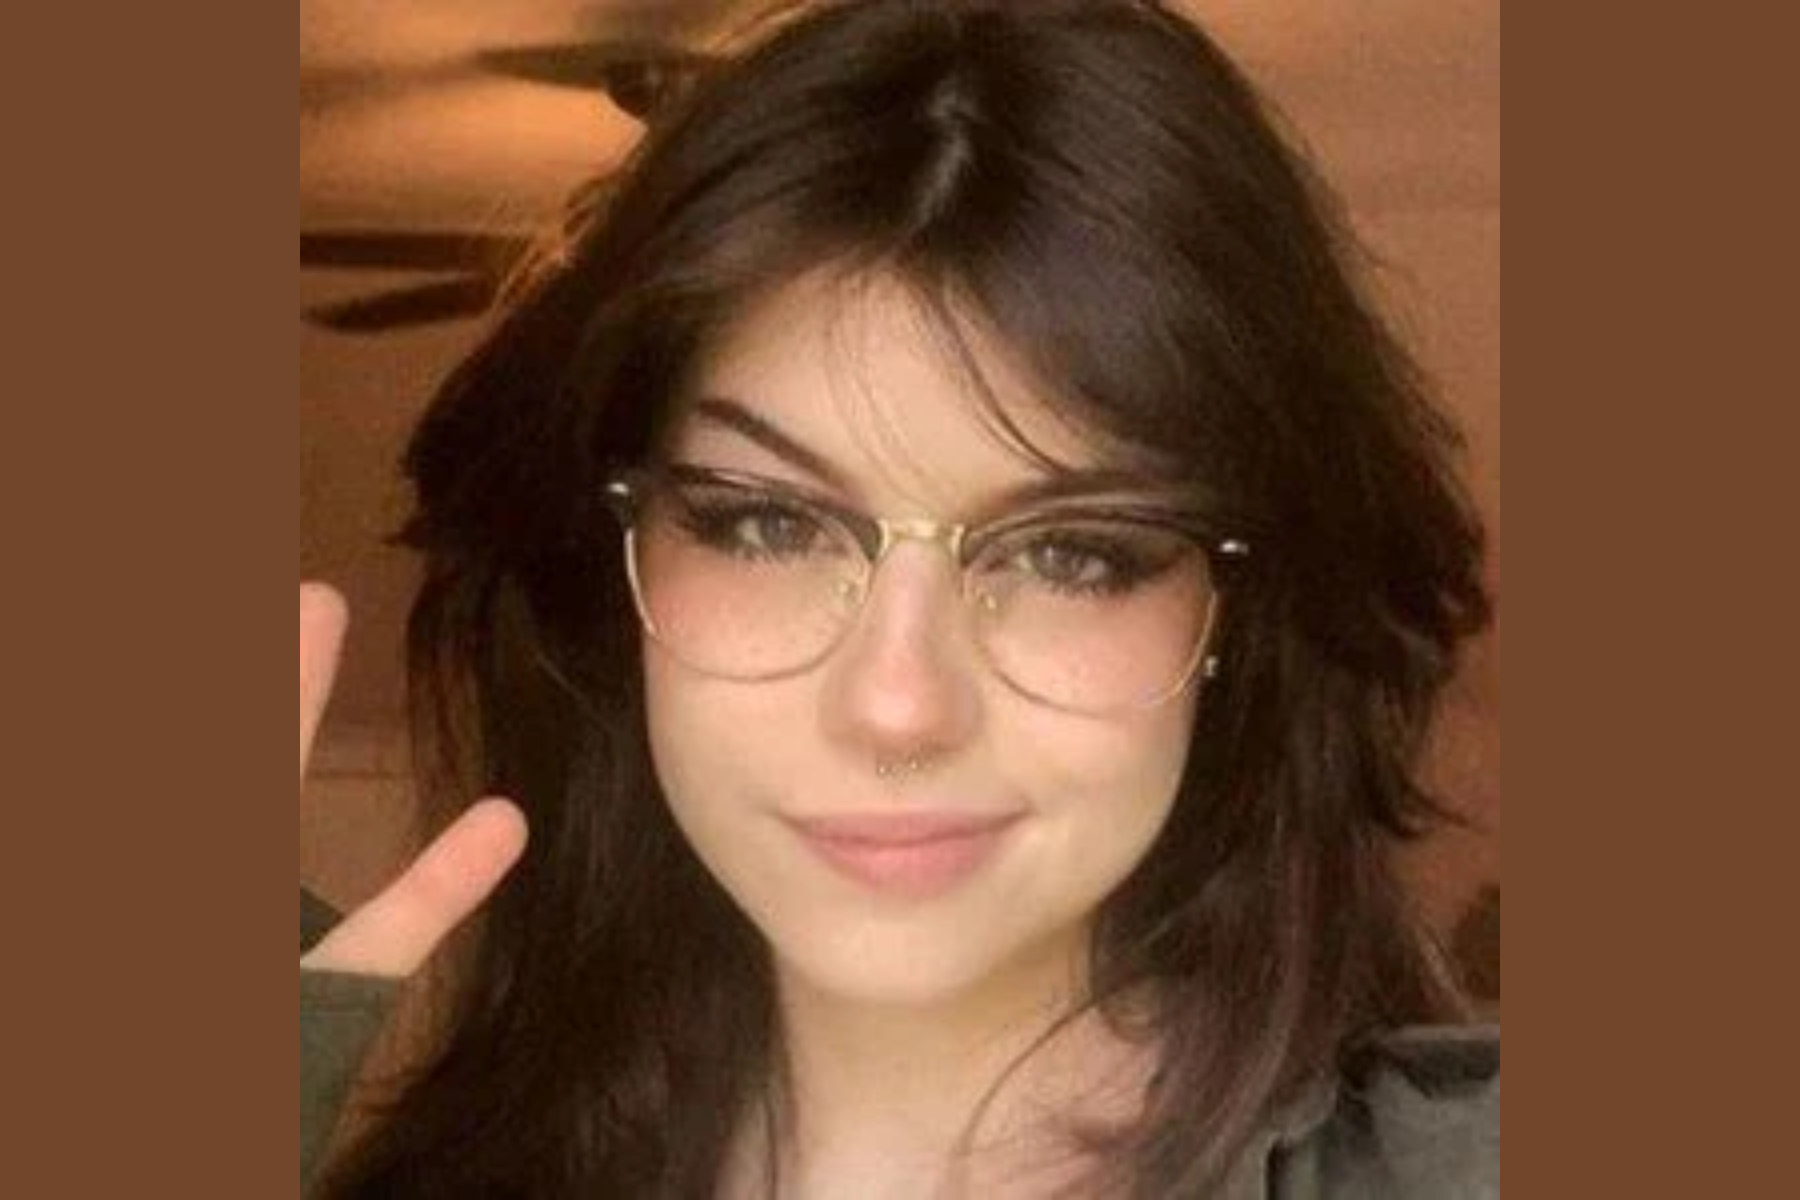 Hannah Owo doing a peace sign and wearing glasses